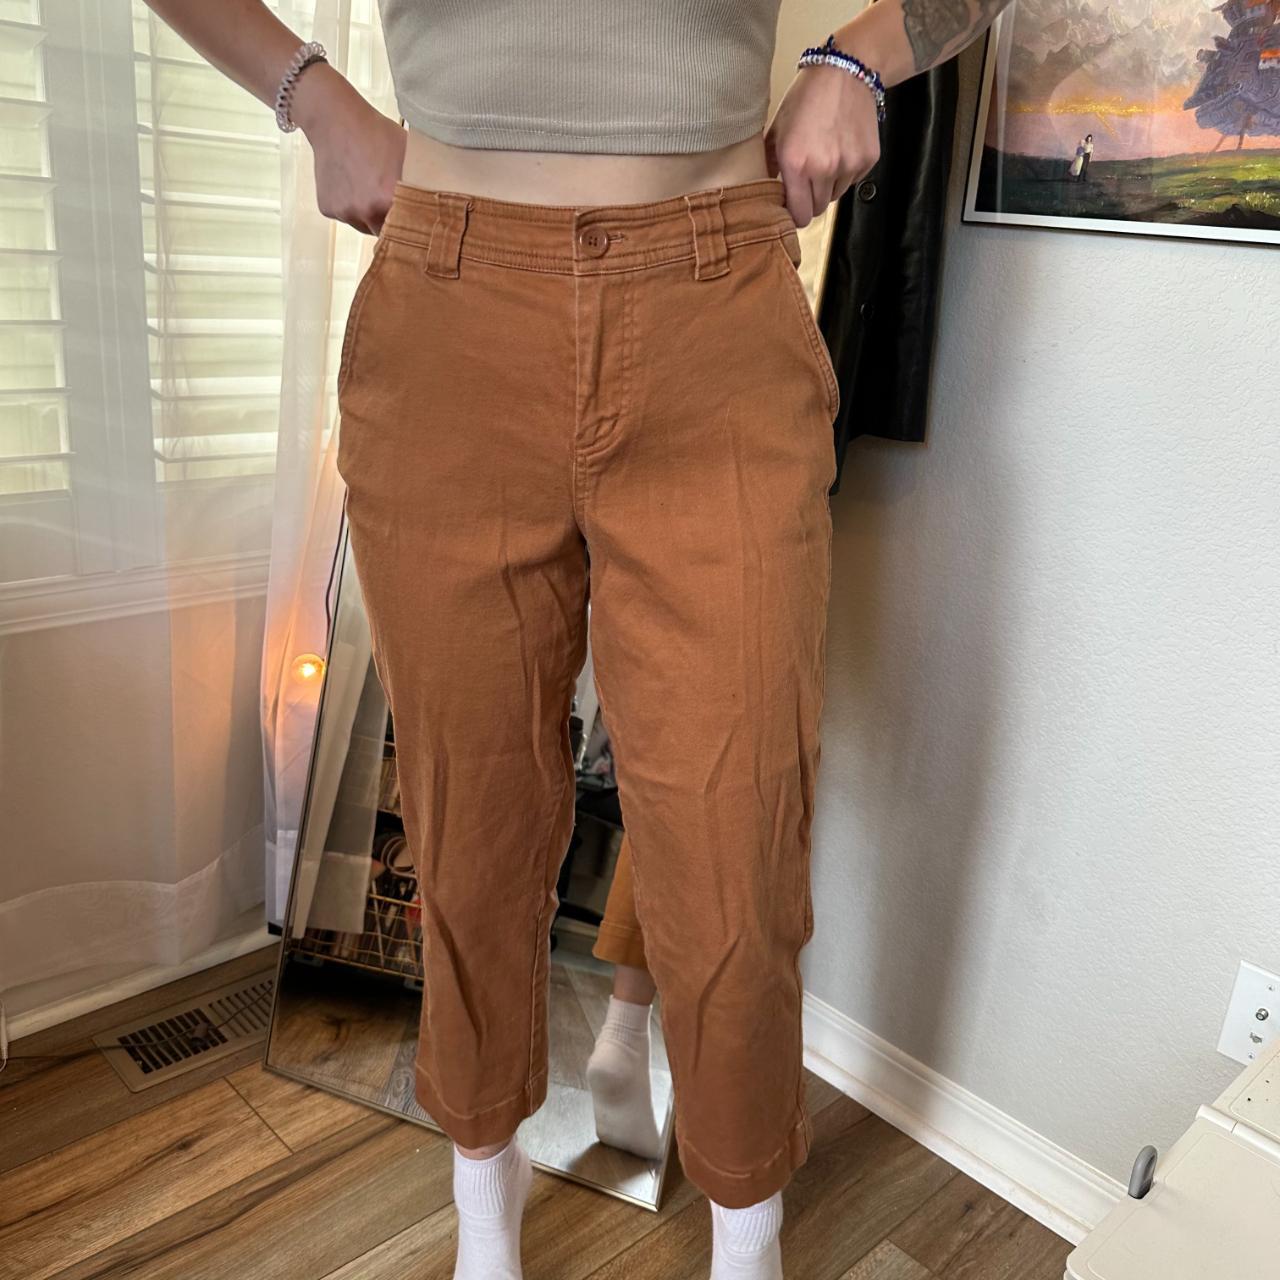 A New Day HighRise Straight Leg Ankle Pants  19 Pants You Need If You  Just Cant Wear Jeans Anymore  POPSUGAR Fashion Photo 14